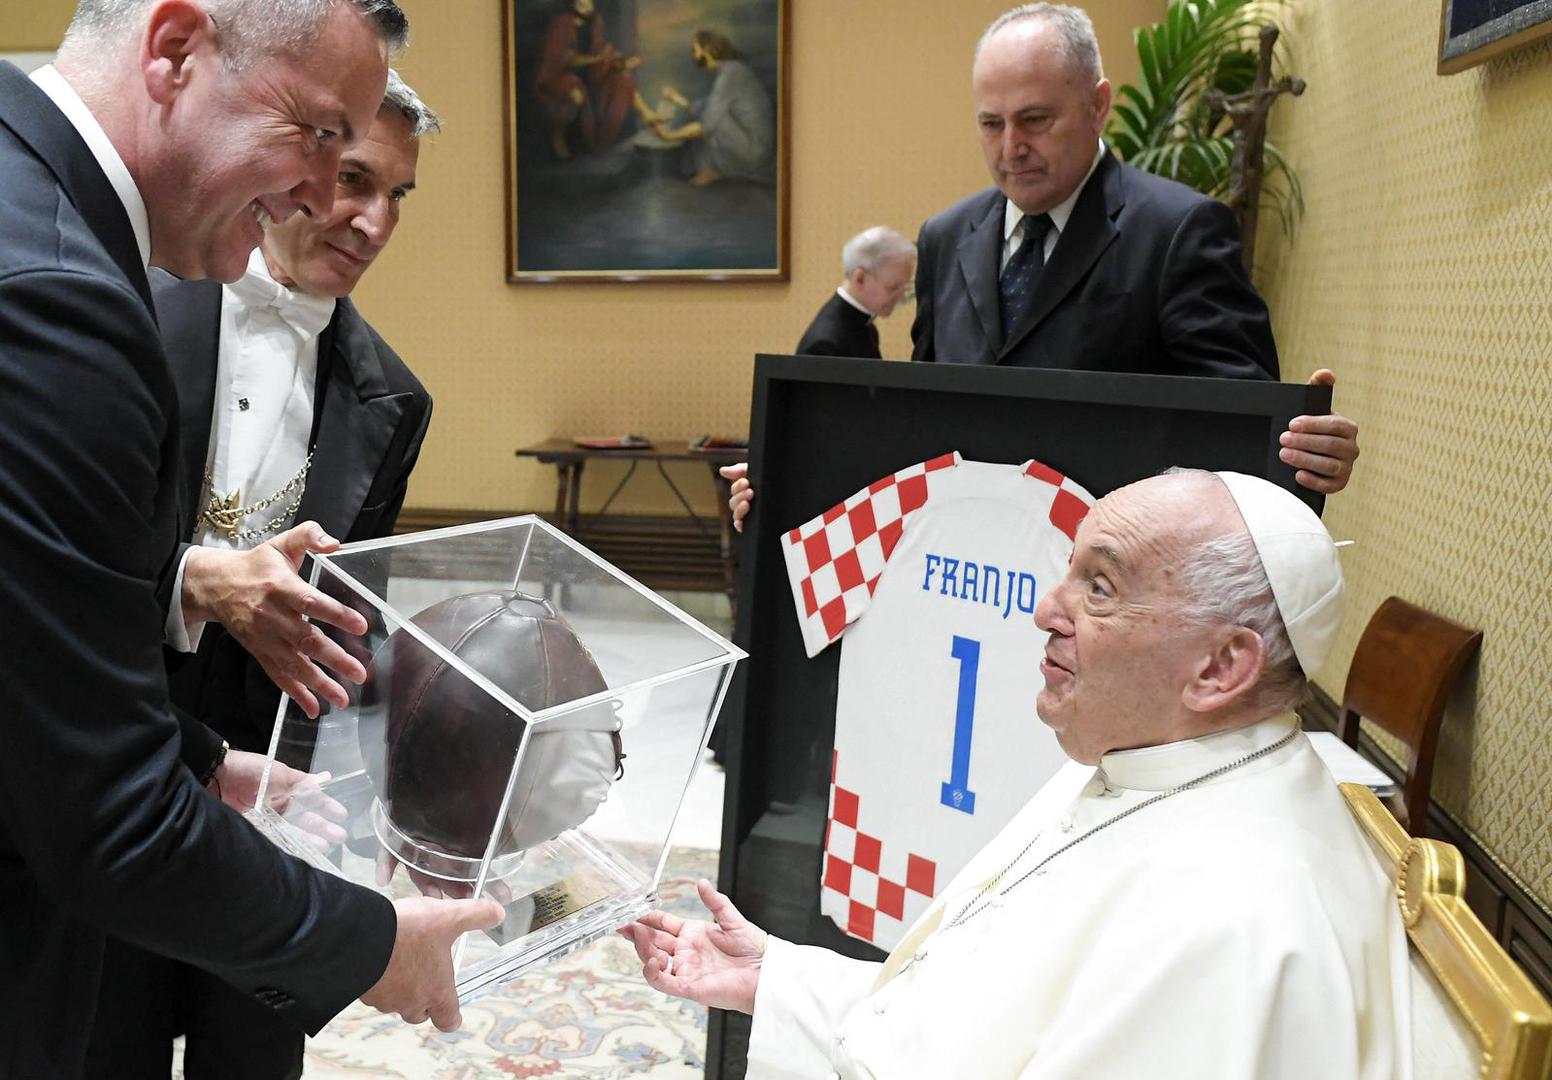 The president of Croatian Football Federation, Marijan Kustic, presents the Pope Francis with a symbolic gift, a Croatian national team jersey during a meeting of the pope with the players of the Croatian National Football Team at the Vatican on June 5, 2024. The Pope praised the Croatian team for their achievements, such as their third-place finish at the last World Cup in Qatar. The Croatians also received his blessing ahead of Euro 2024, which will soon be hosted by Germany. Photo: (EV) Vatican Media/ABACAPRESS.COM Photo: ABACA/ABACA